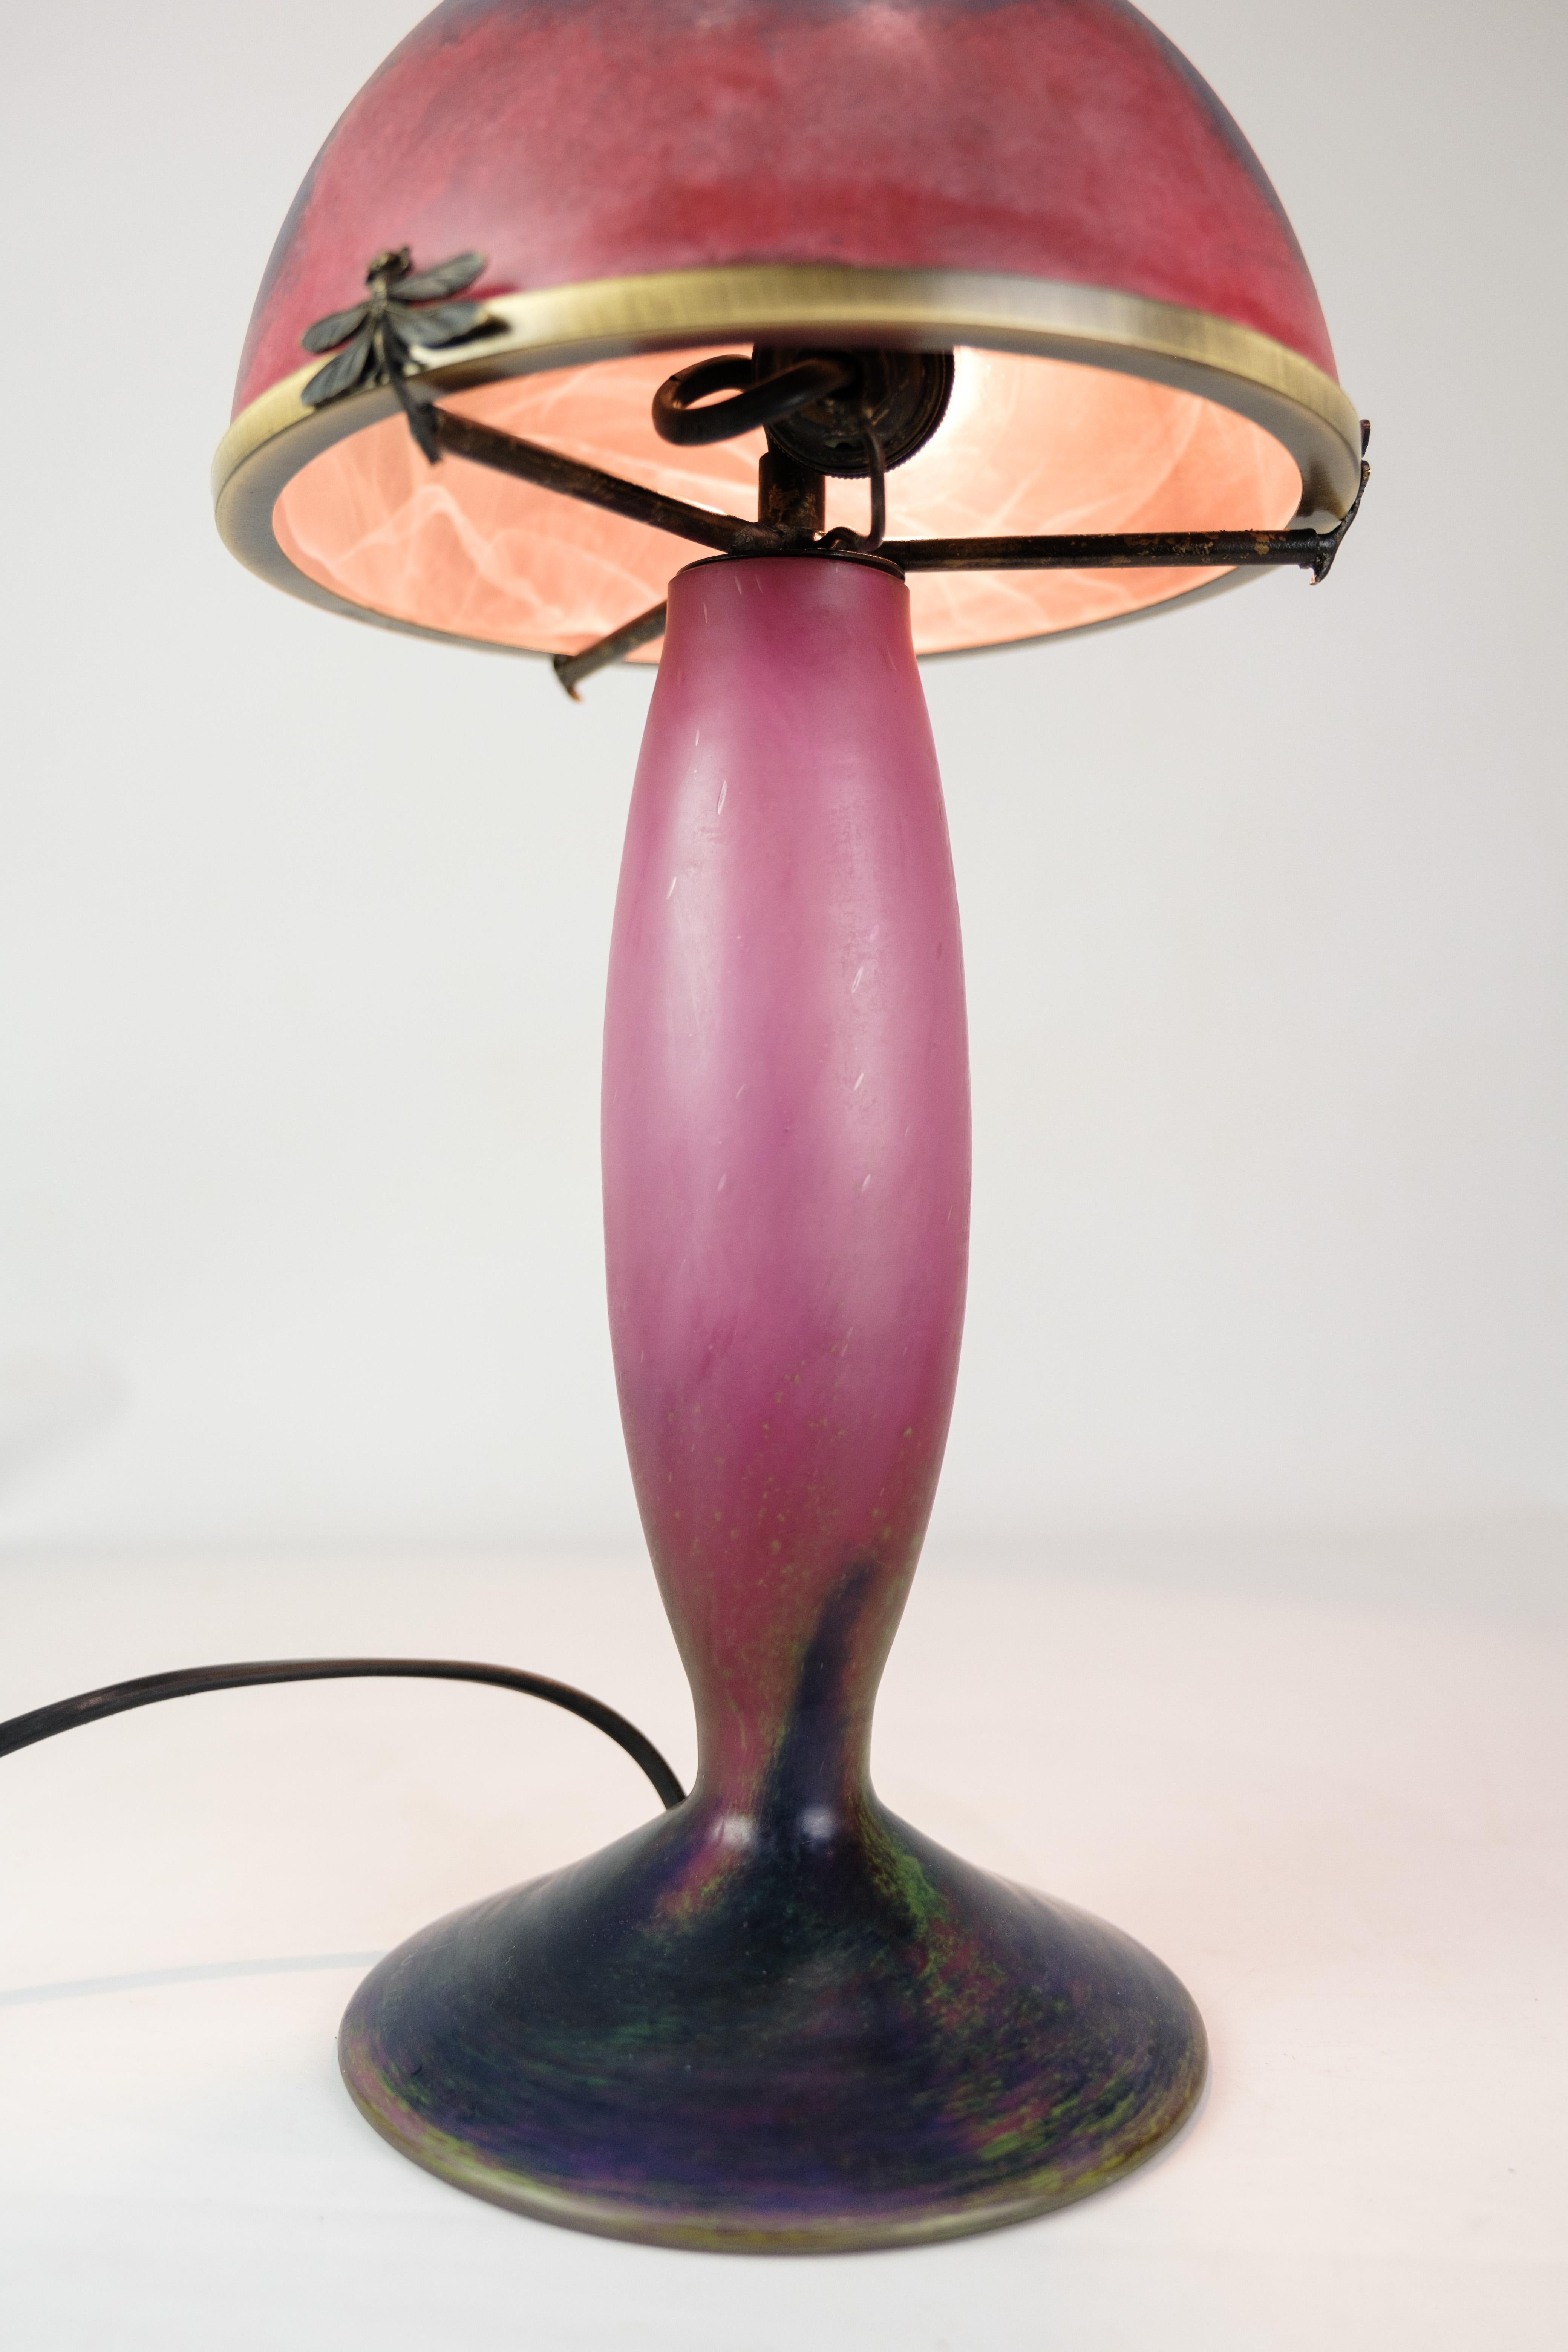 French Table Lamp in Dark Purple and Bordeaux Colors, Le Verre Francais, 1920s For Sale 5